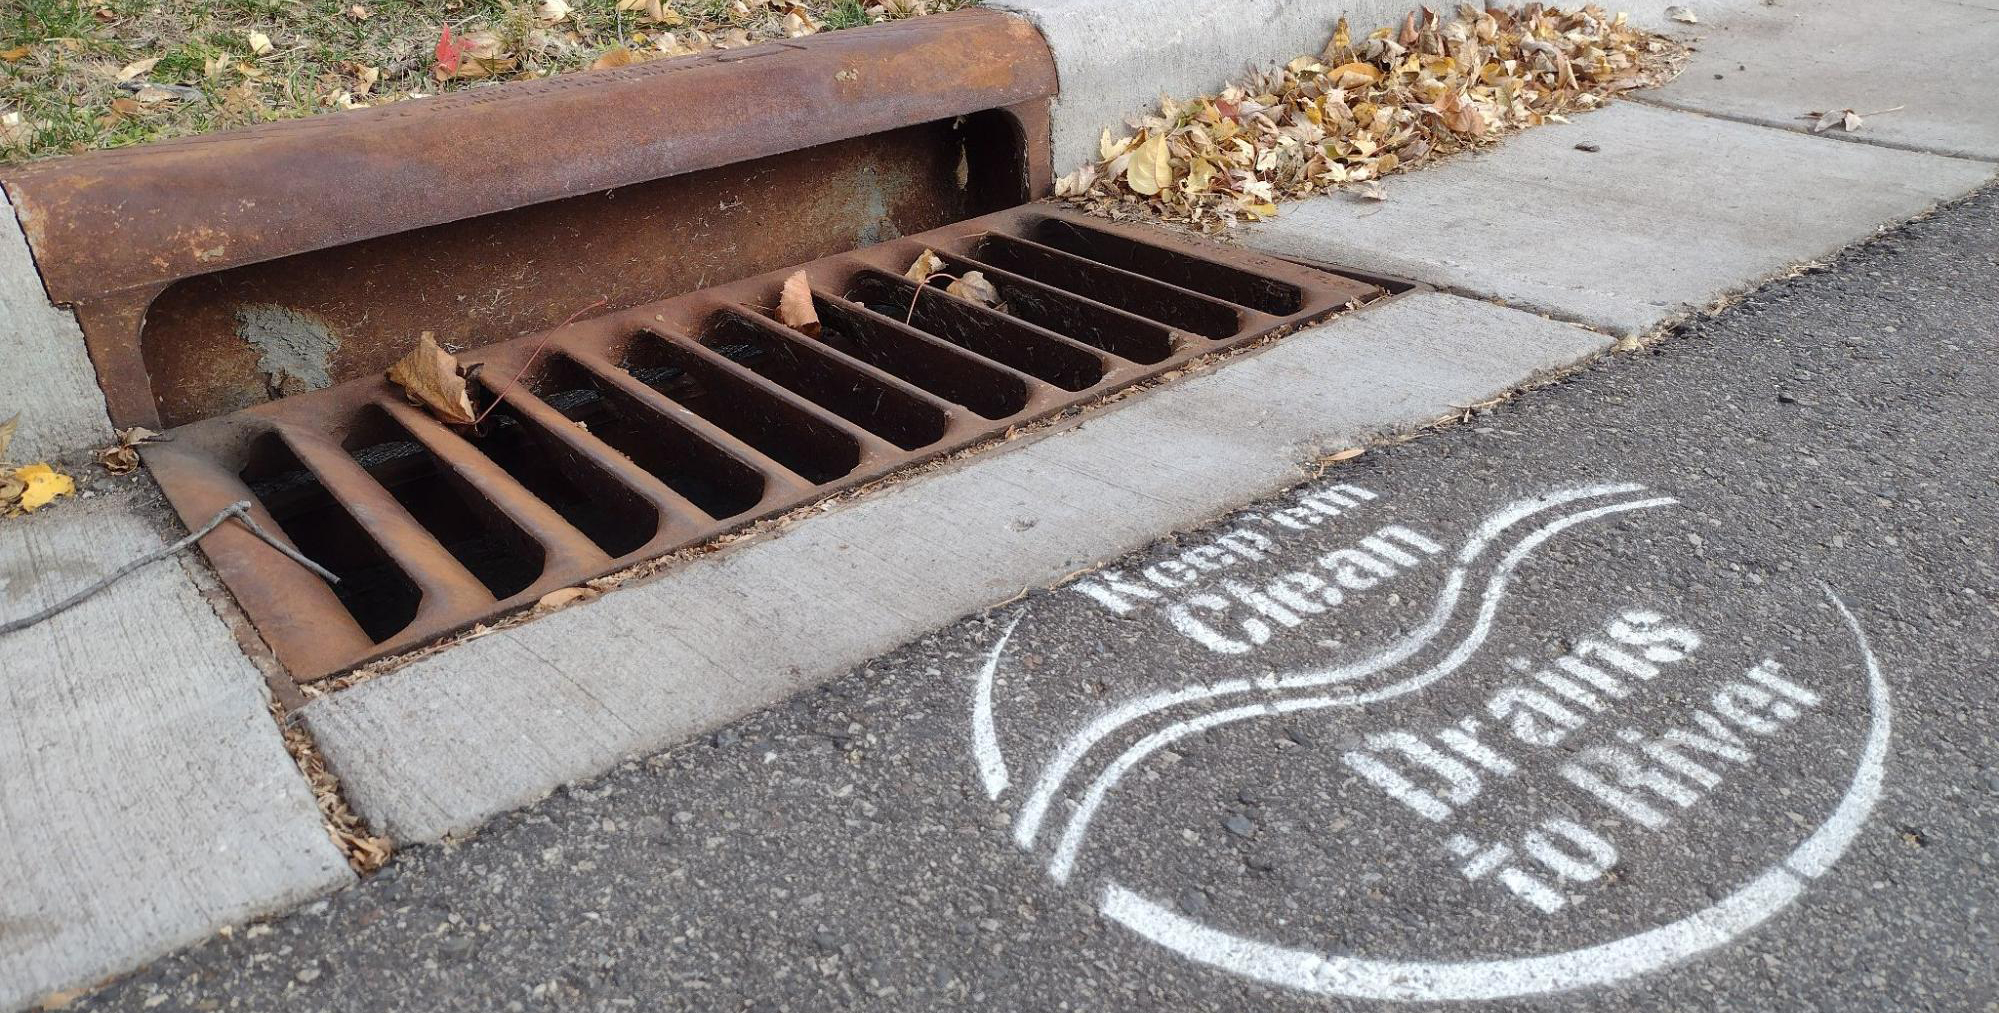 Street curb storm drain without leaves and with stenciled words on pavement that say "Keep them clean. Drains to River."